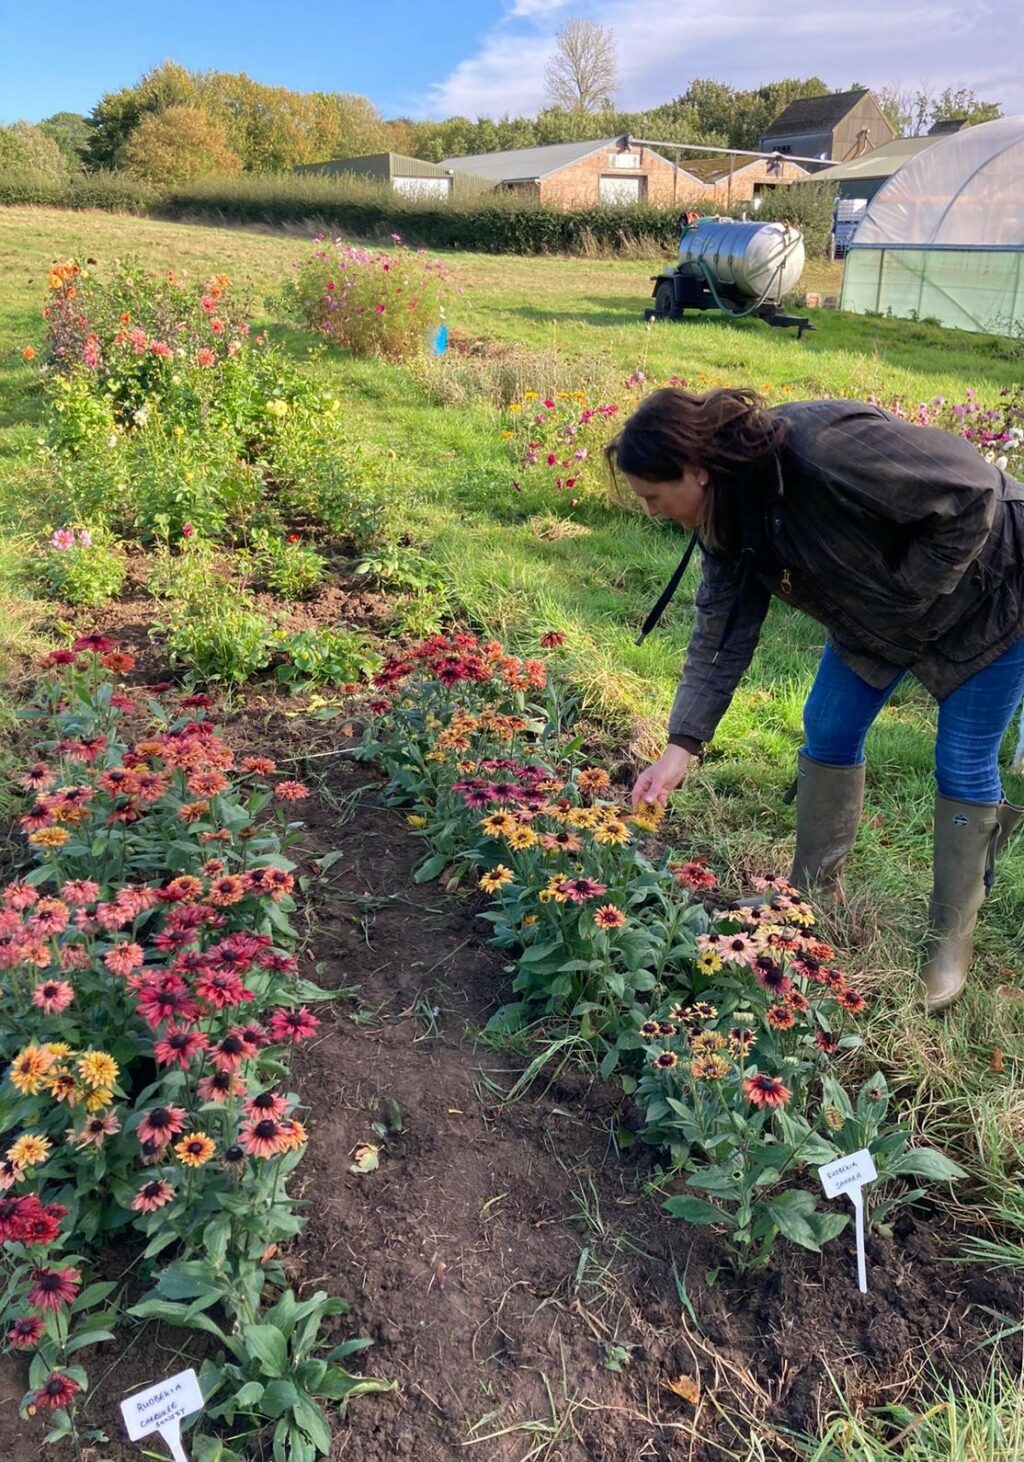 Josie of Brown's British Flowers, Cambridgeshire, inspects her rows of rudbeckia in the flower field. Photo by Petals and Amazon.